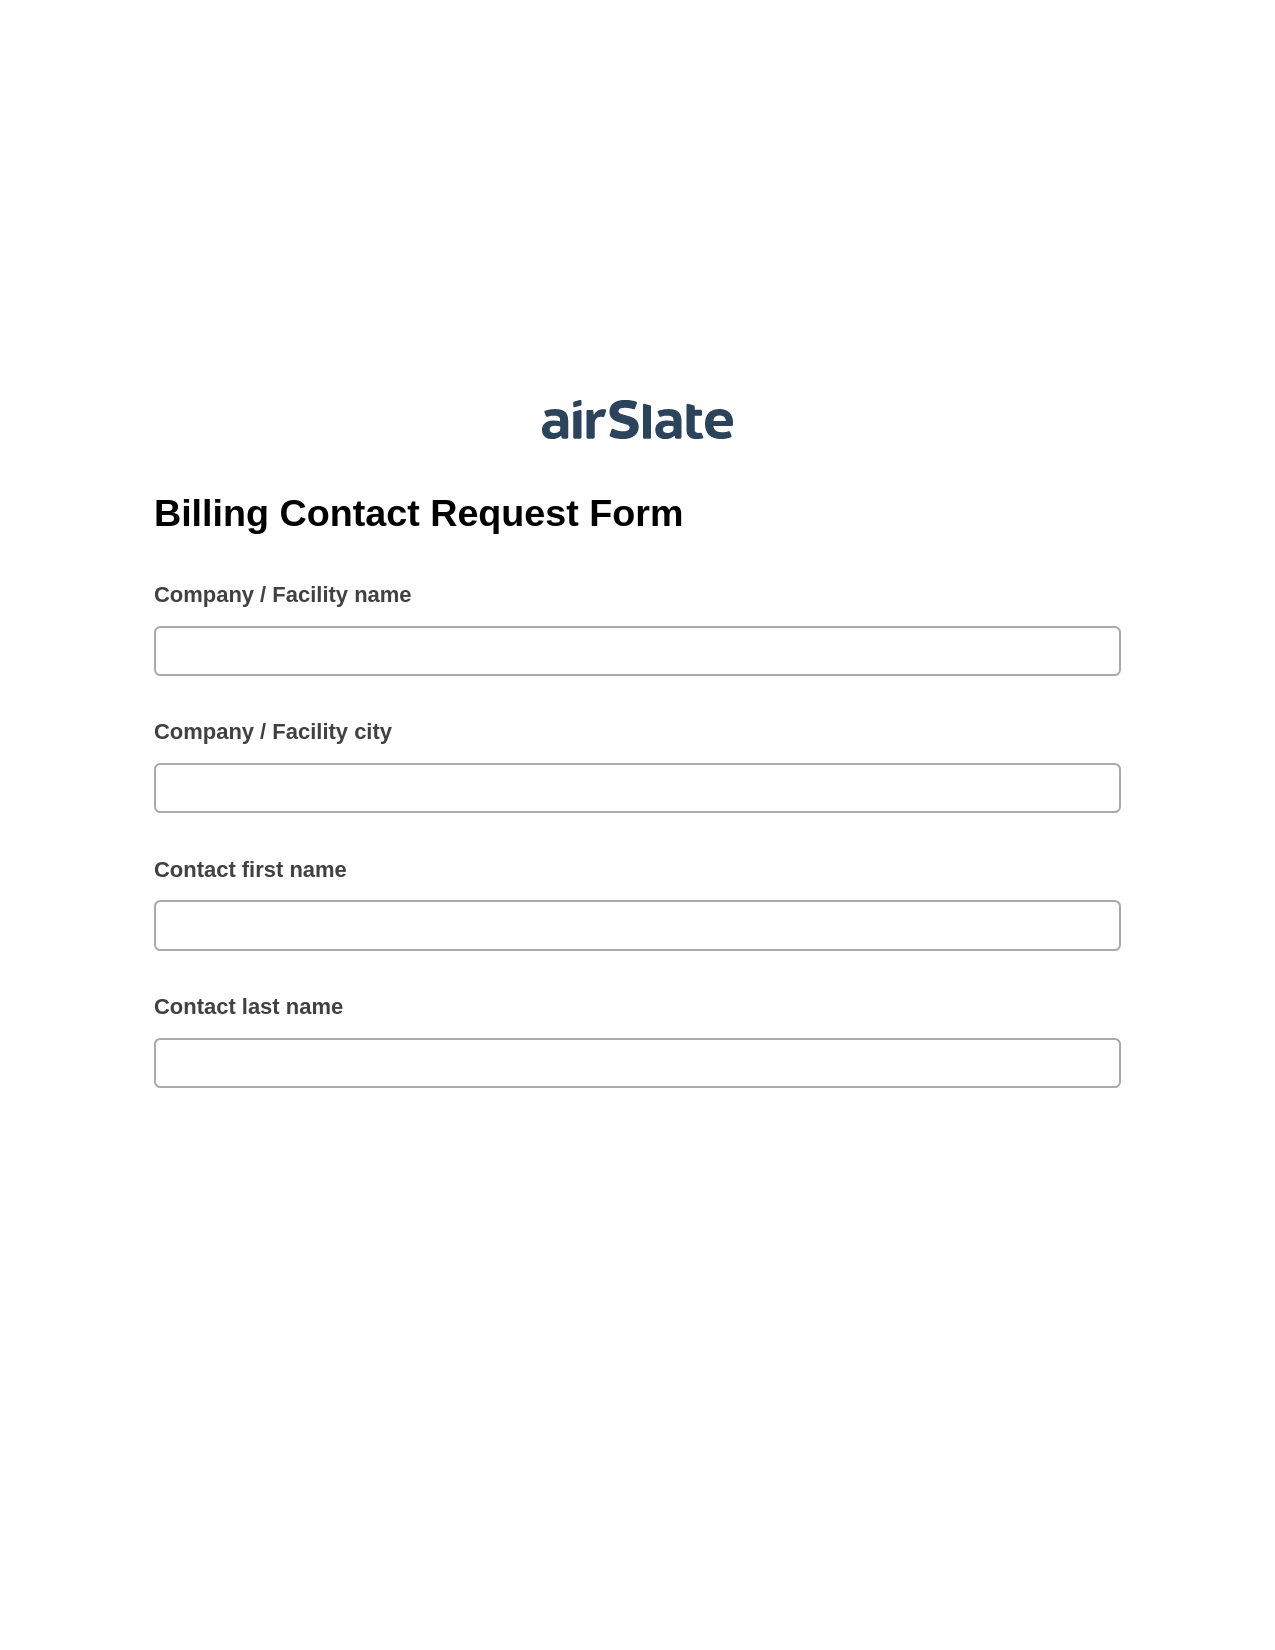 Multirole Billing Contact Request Form Pre-fill Dropdowns from Google Sheet Bot, Revoke Access Bot, Archive to SharePoint Folder Bot